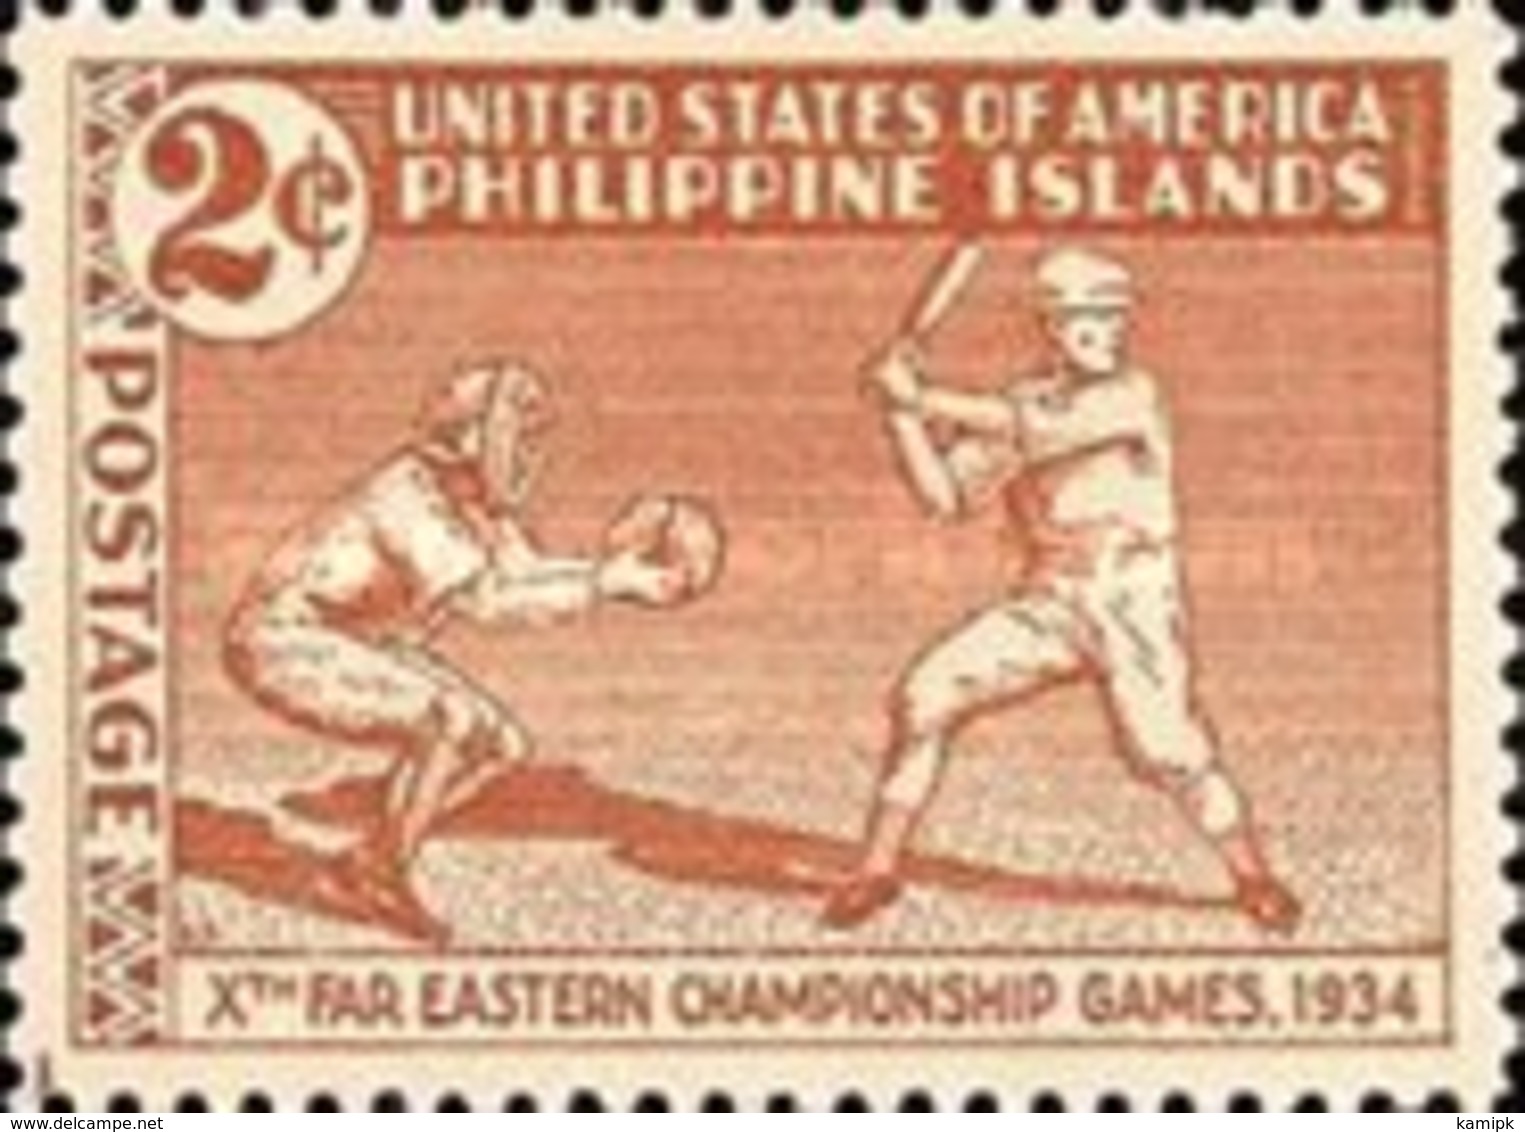 USED STAMPS Philippines - The 10th Far Eastern Championship Game - 1934 - Philippines